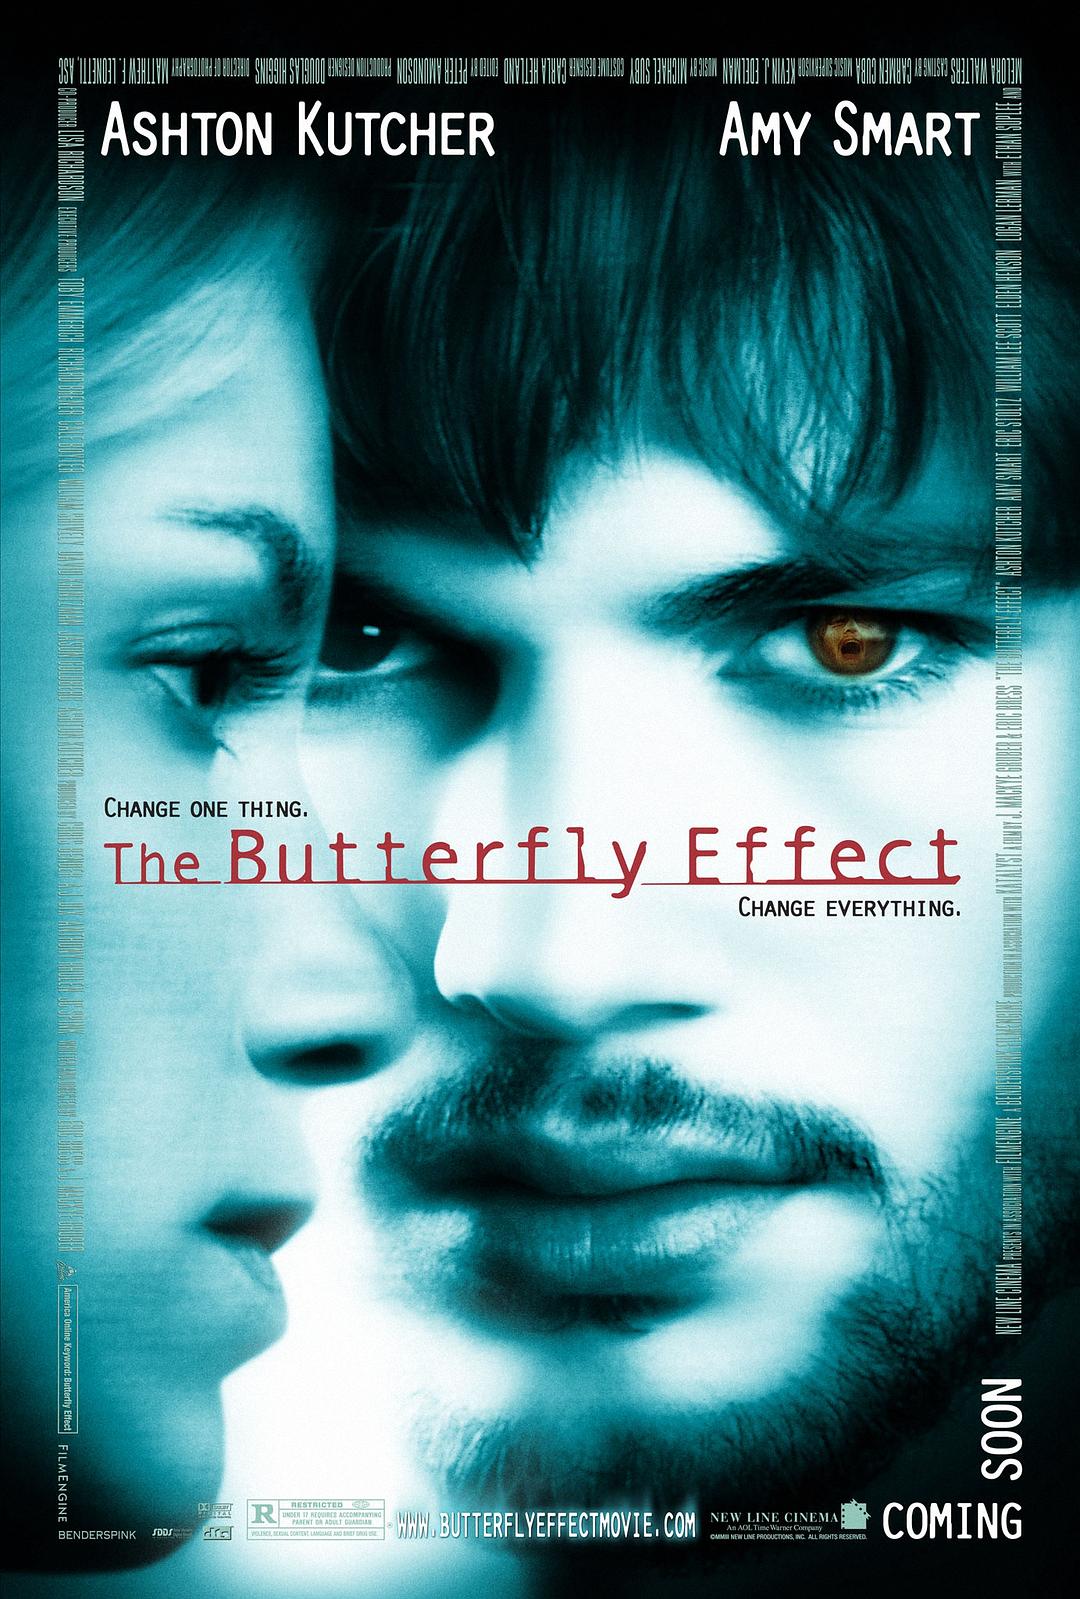 ЧӦ The.Butterfly.Effect.2004.DC.1080p.BluRay.REMUX.AVC.DTS-HD.MA.6.1-FGT 20.16-1.png